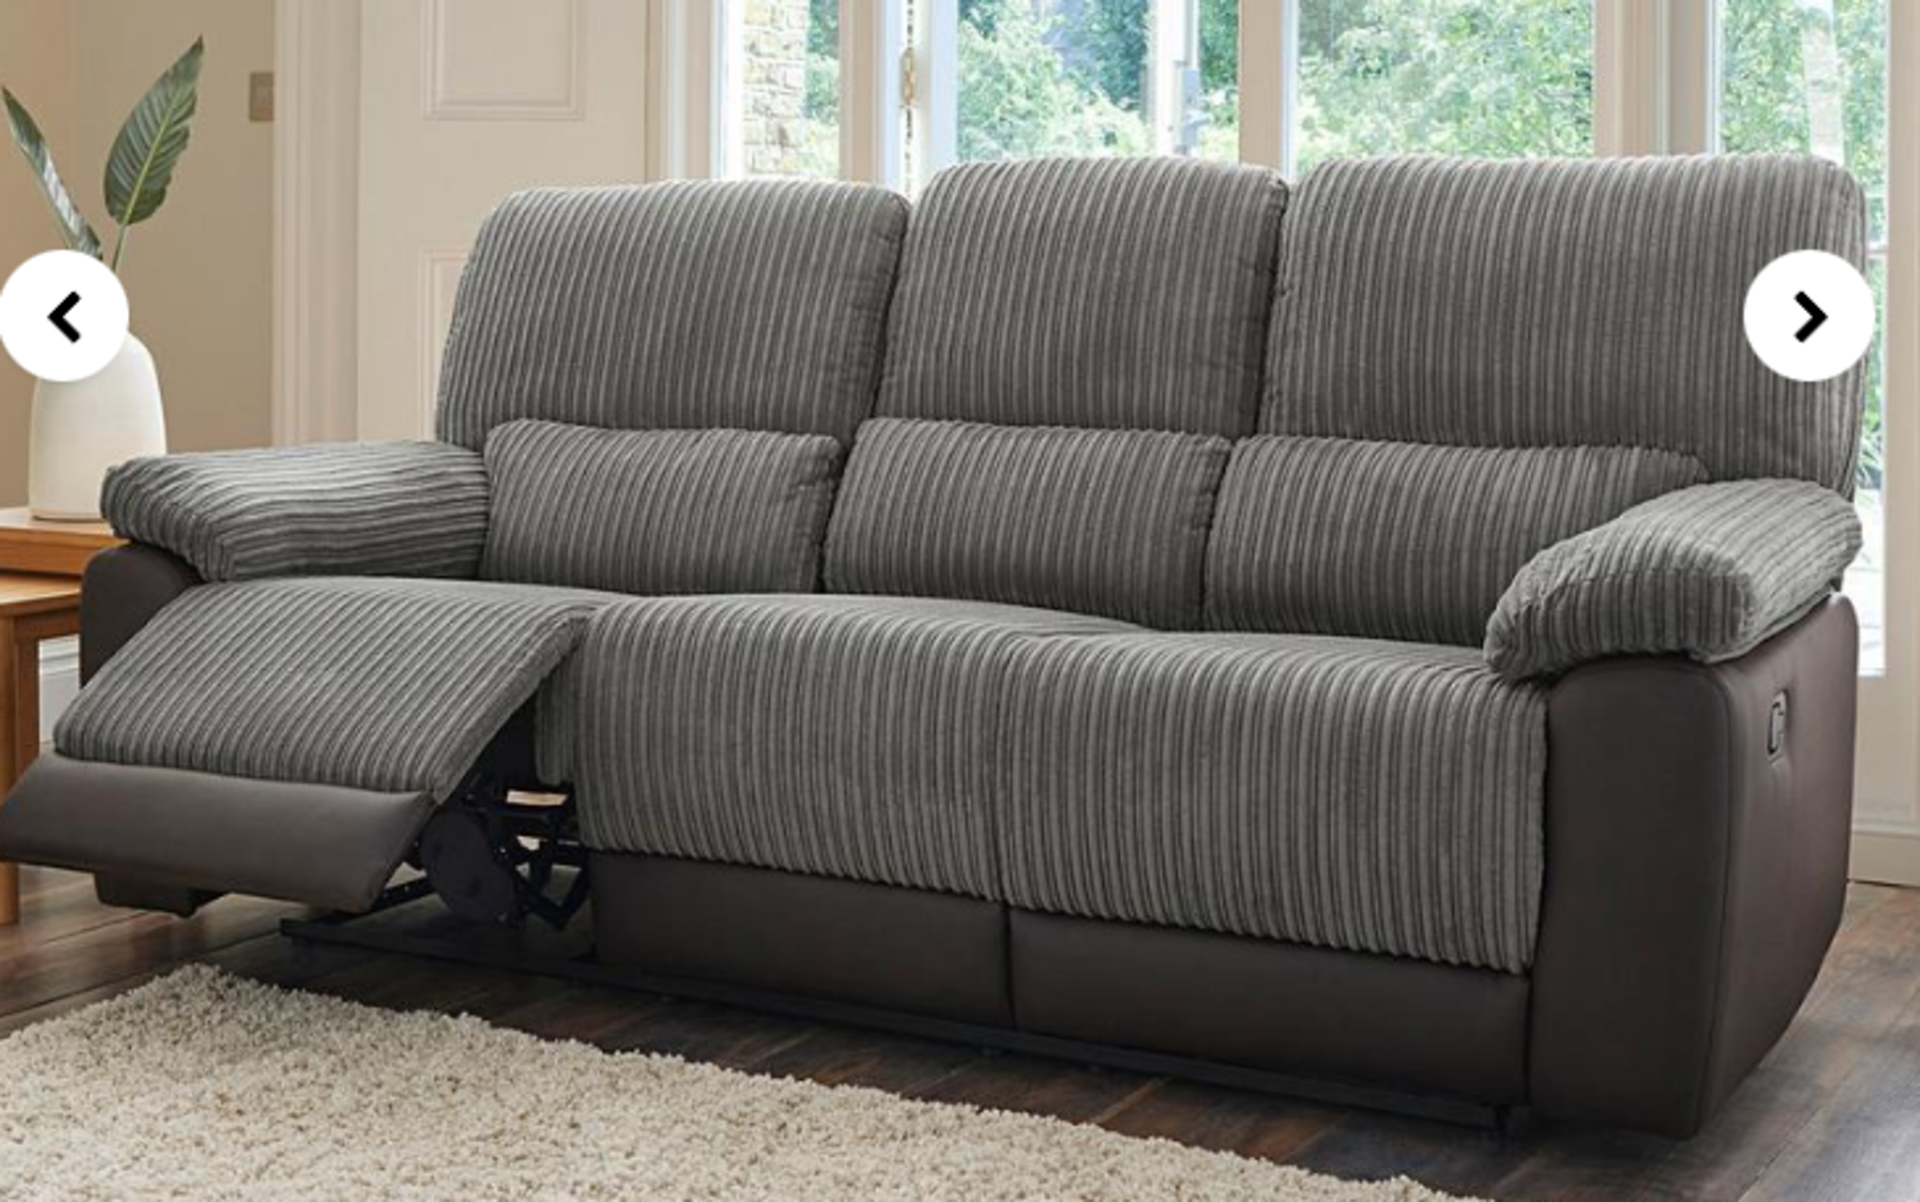 Harlow Fabric/Faux Leather Recliner 3 Seater Sofa. - ER23. RRP £1,119.00. The Harlow Three Seater - Image 2 of 2